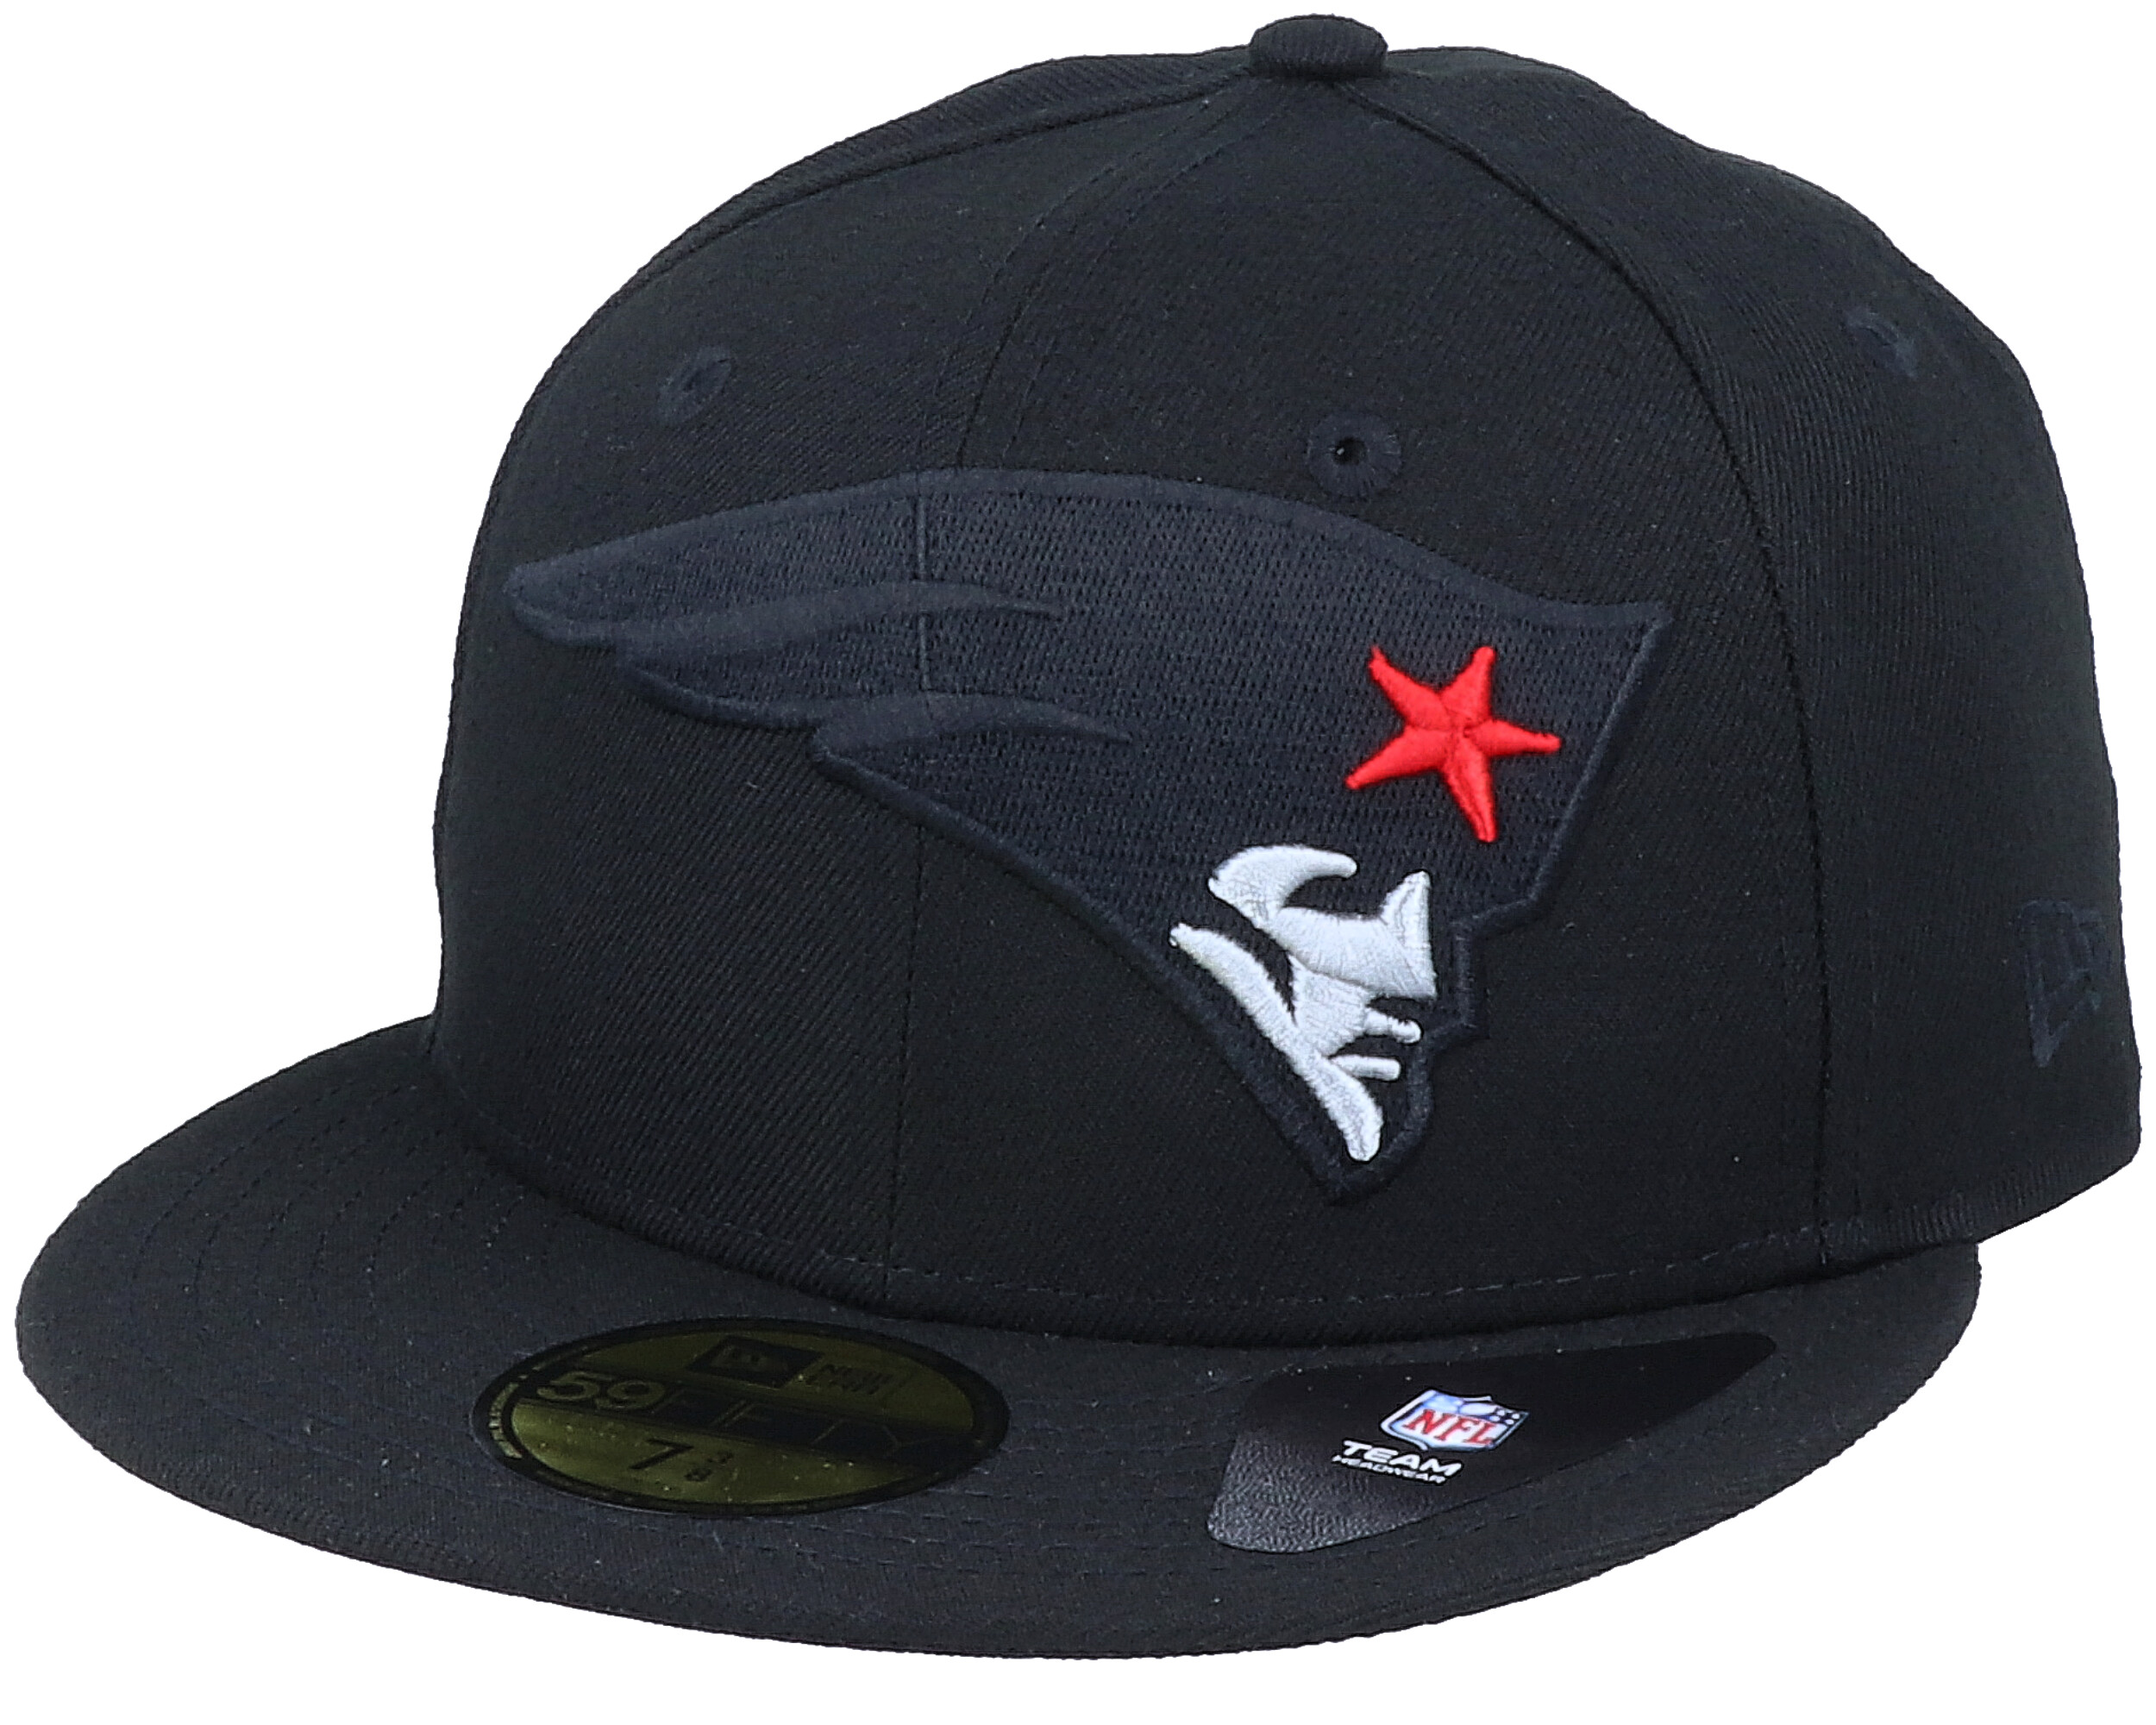 New England Patriots Elements 2.0 Black/Red Fitted - New Era caps ...